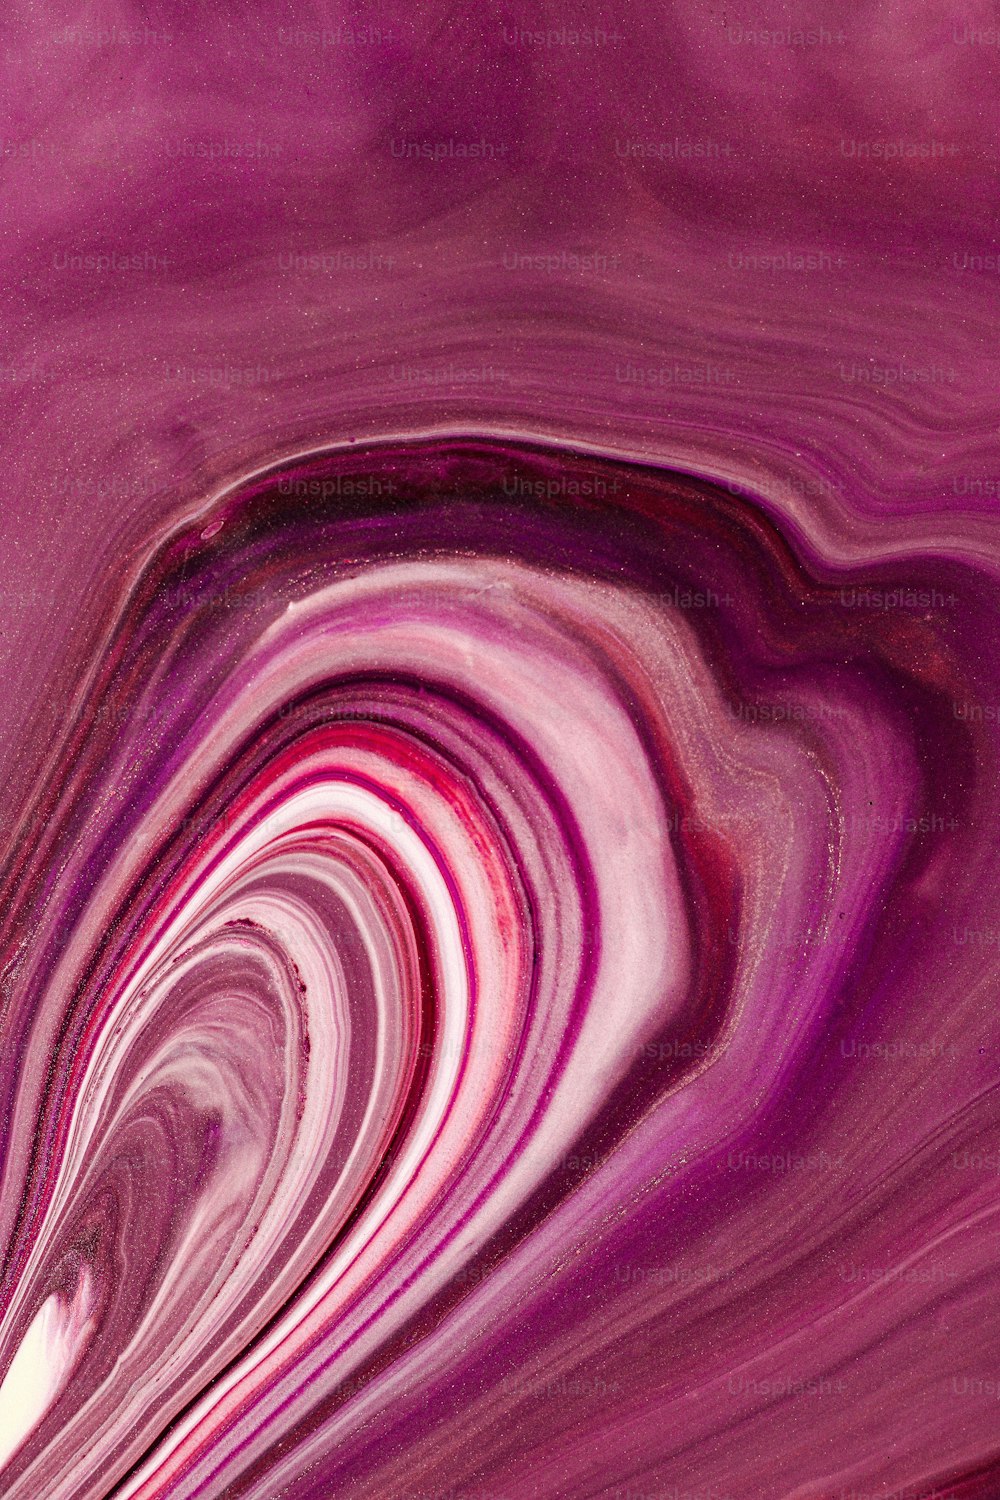 a close up of a purple and white swirl